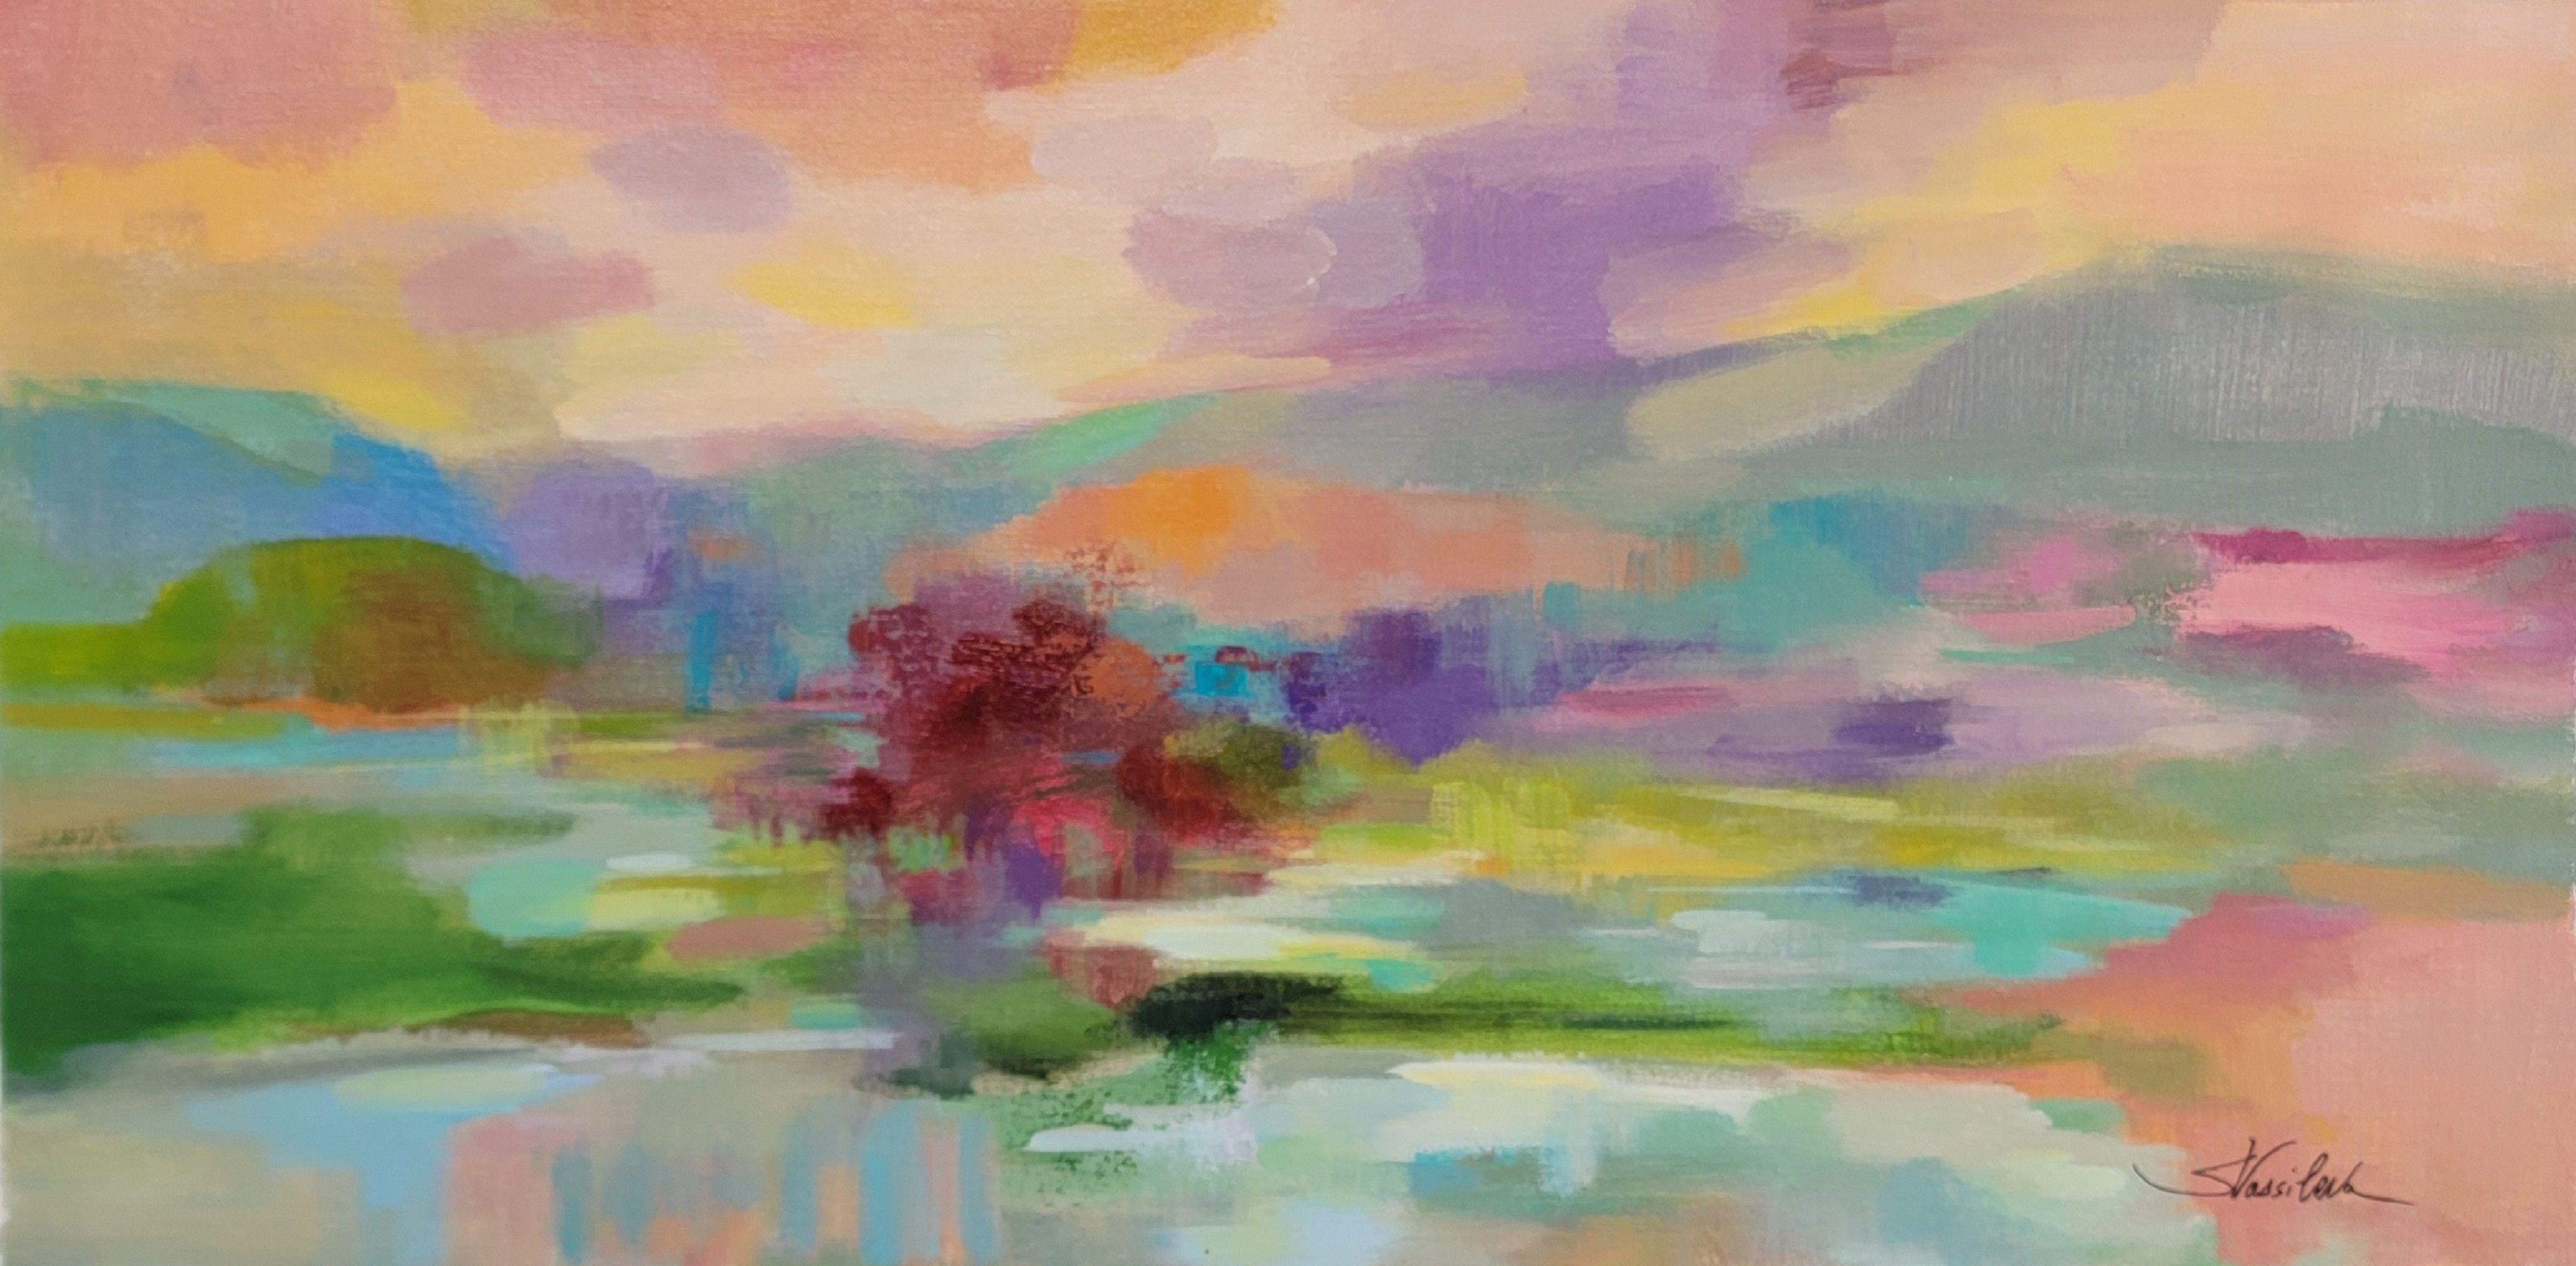 This painting, created between reality and abstraction, is capturing the mood of a beautiful summer scene. The colors are warm and bold - pink, purple, yellow and touches of cool green and blue express the rich palette of the landscape. Bright,